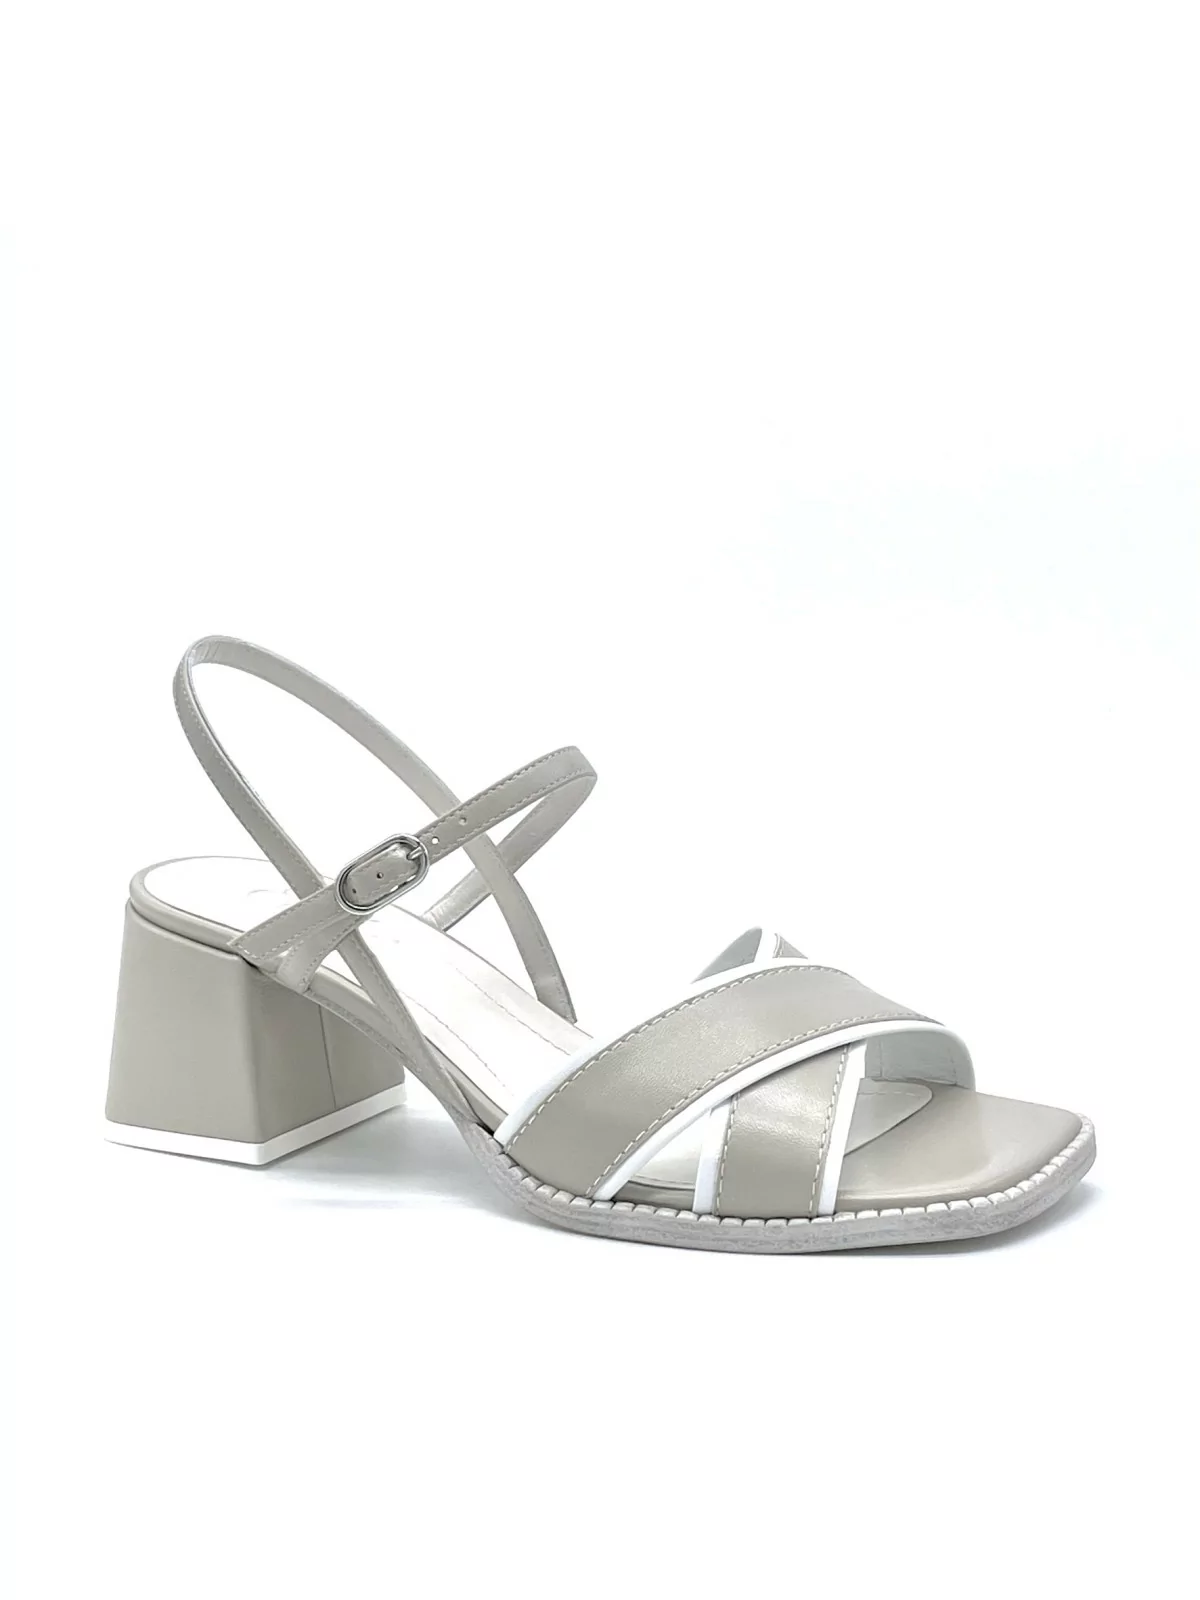 Light taupe and white leather sandal. Leather lining. Leather sole. 5,5 cm heel